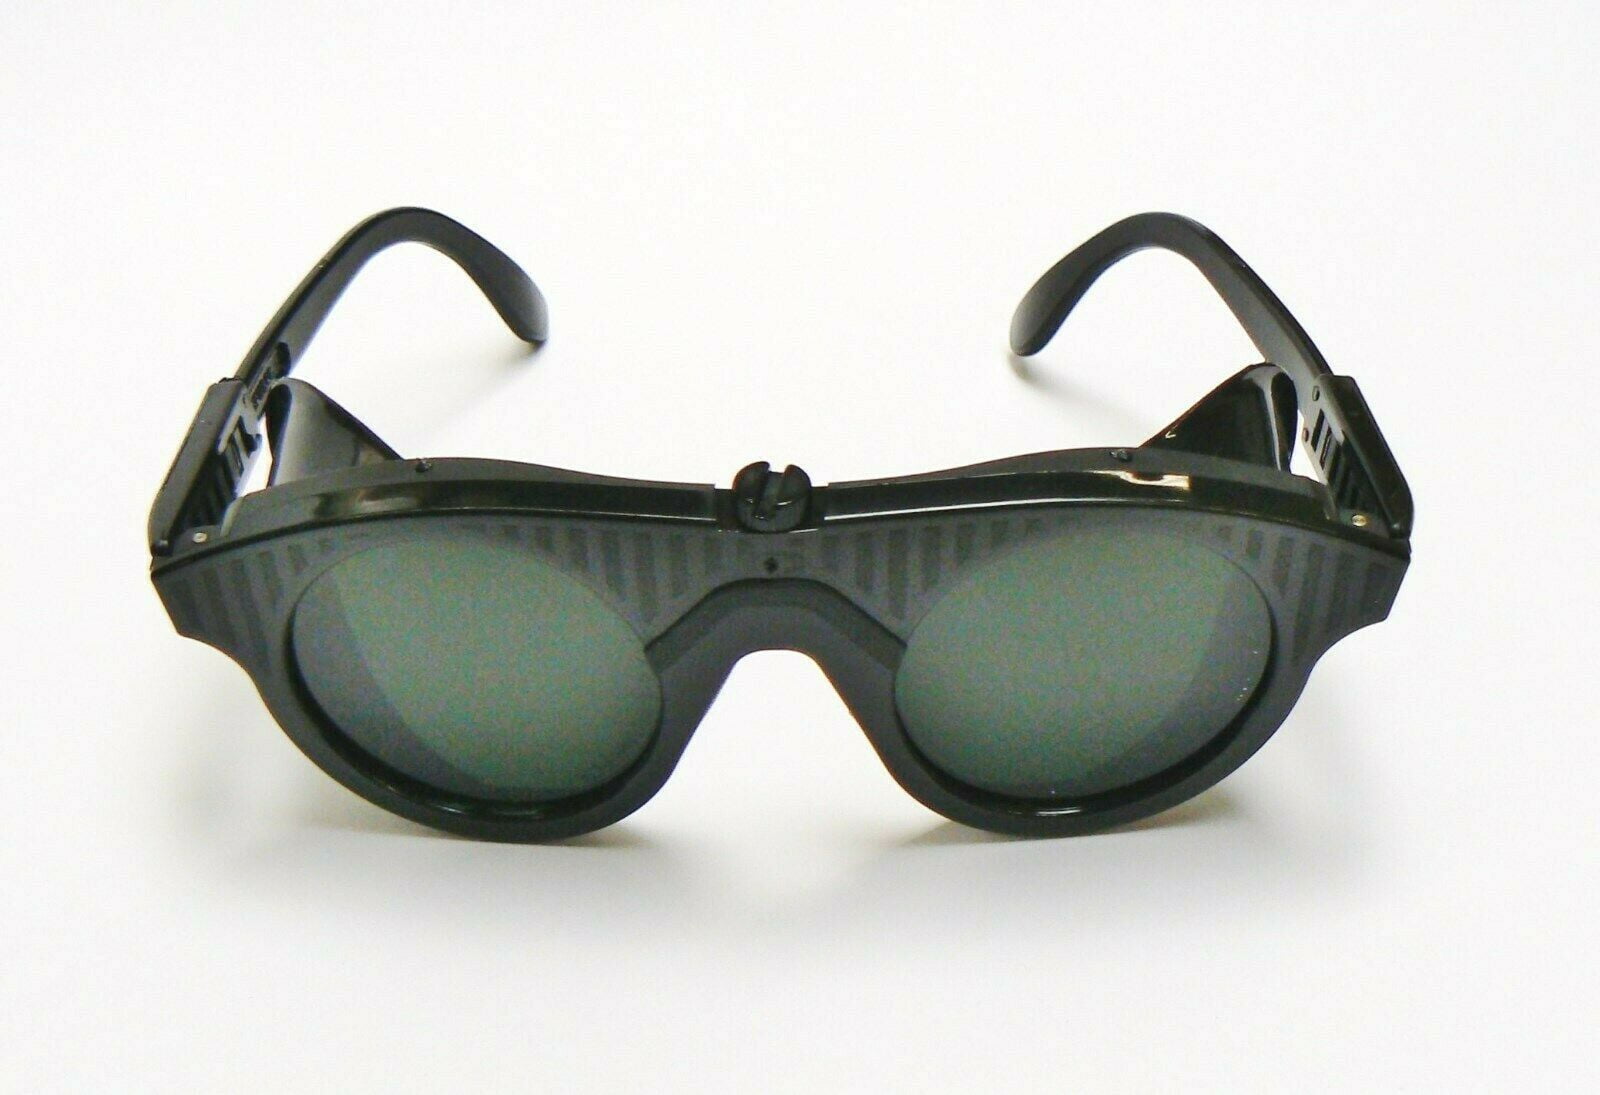 German-made Safety Goggles with Welding Lenses and UV Protecting Lenses